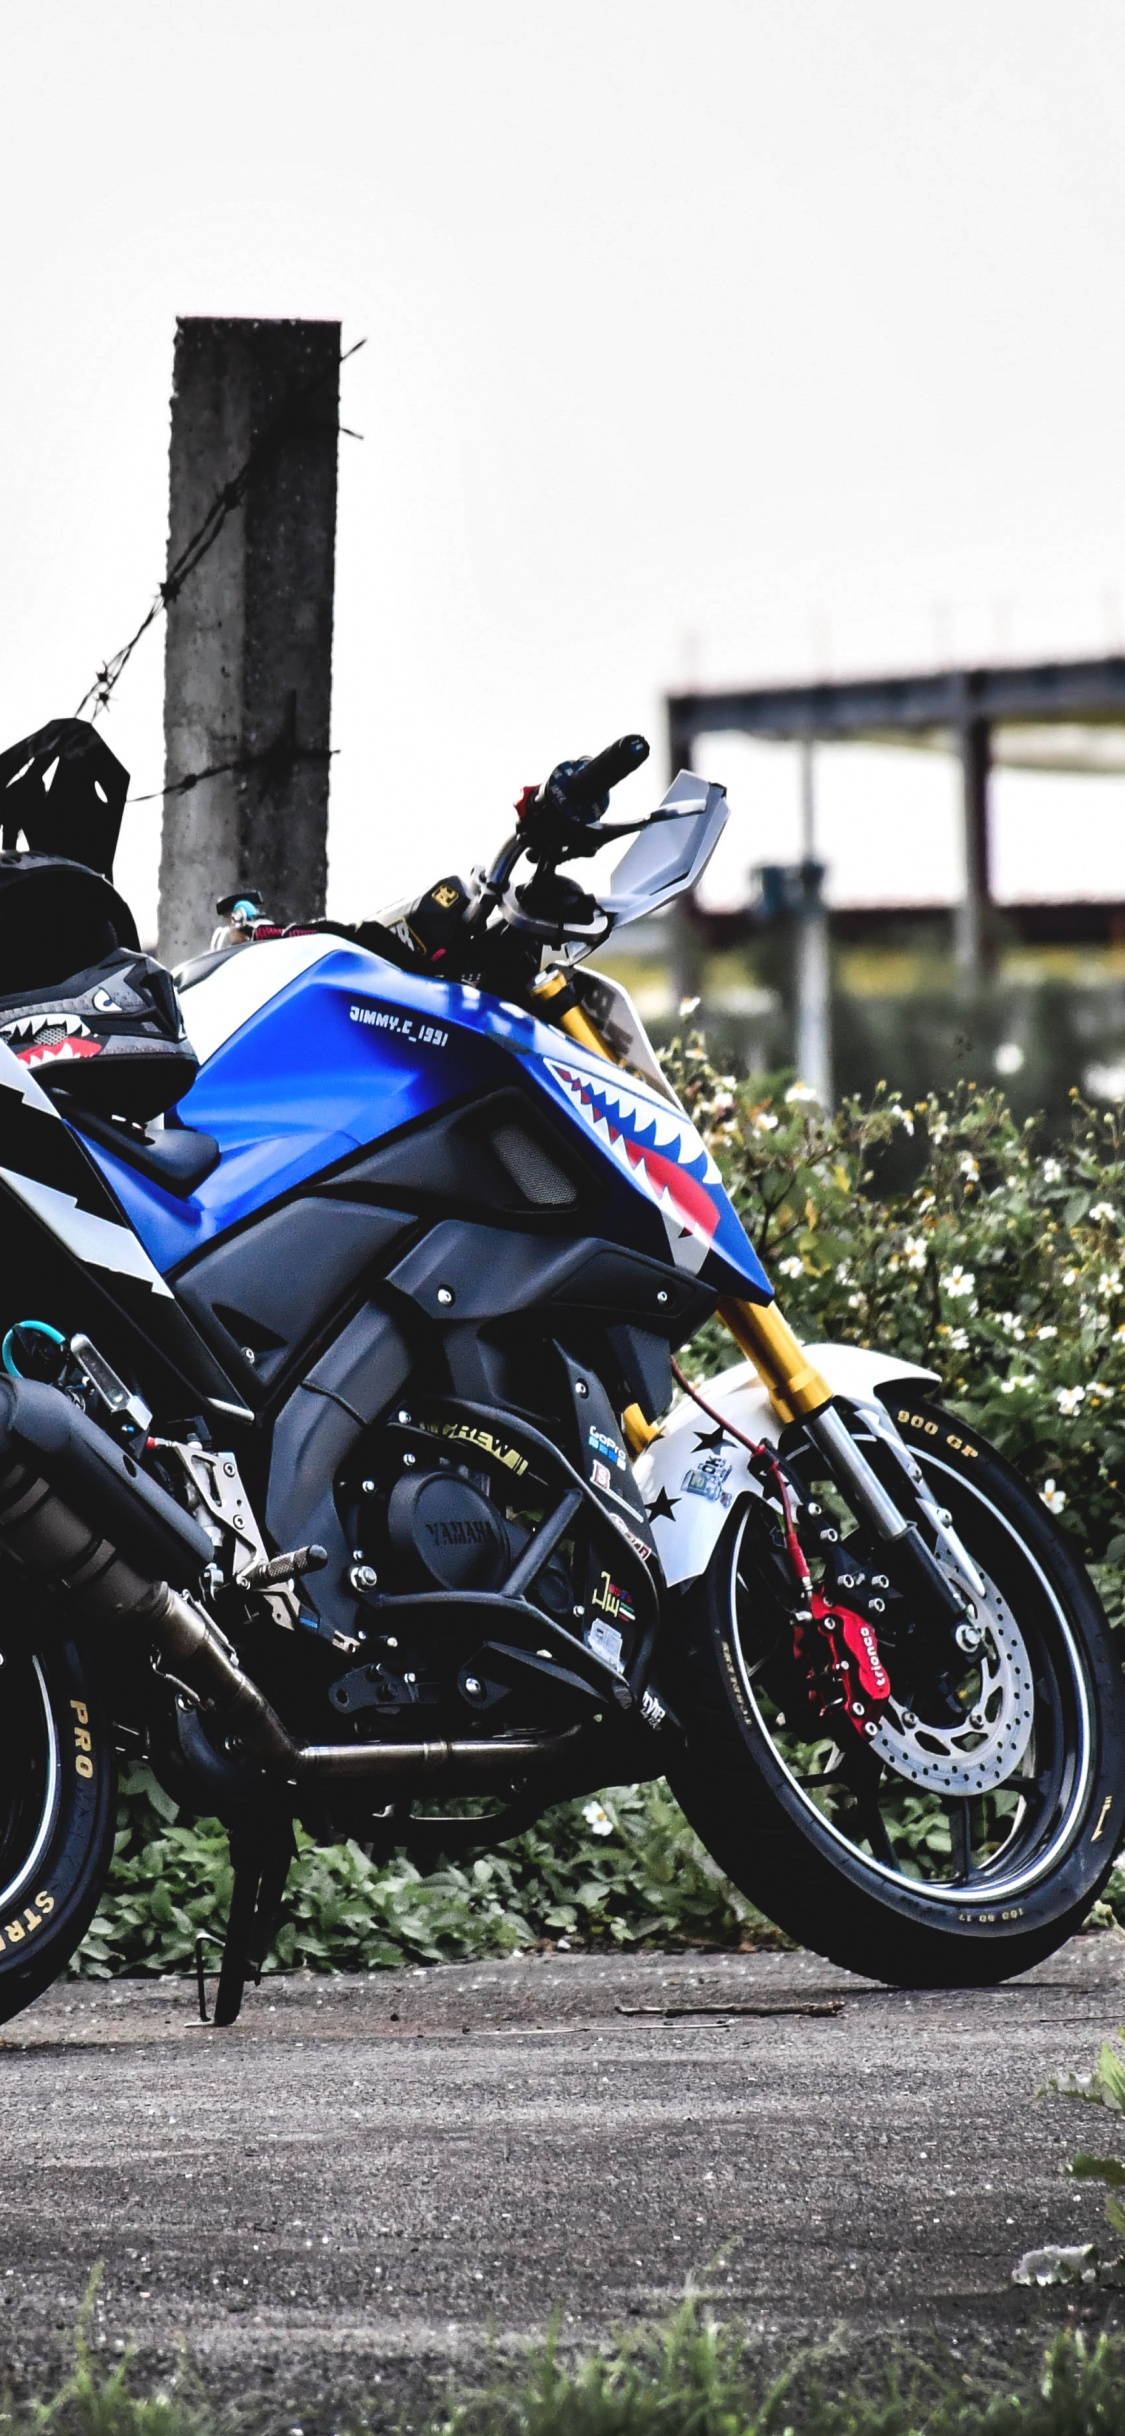 Black and Blue Sports Bike Parked on Gray Concrete Road During Daytime. Wallpaper in 1125x2436 Resolution